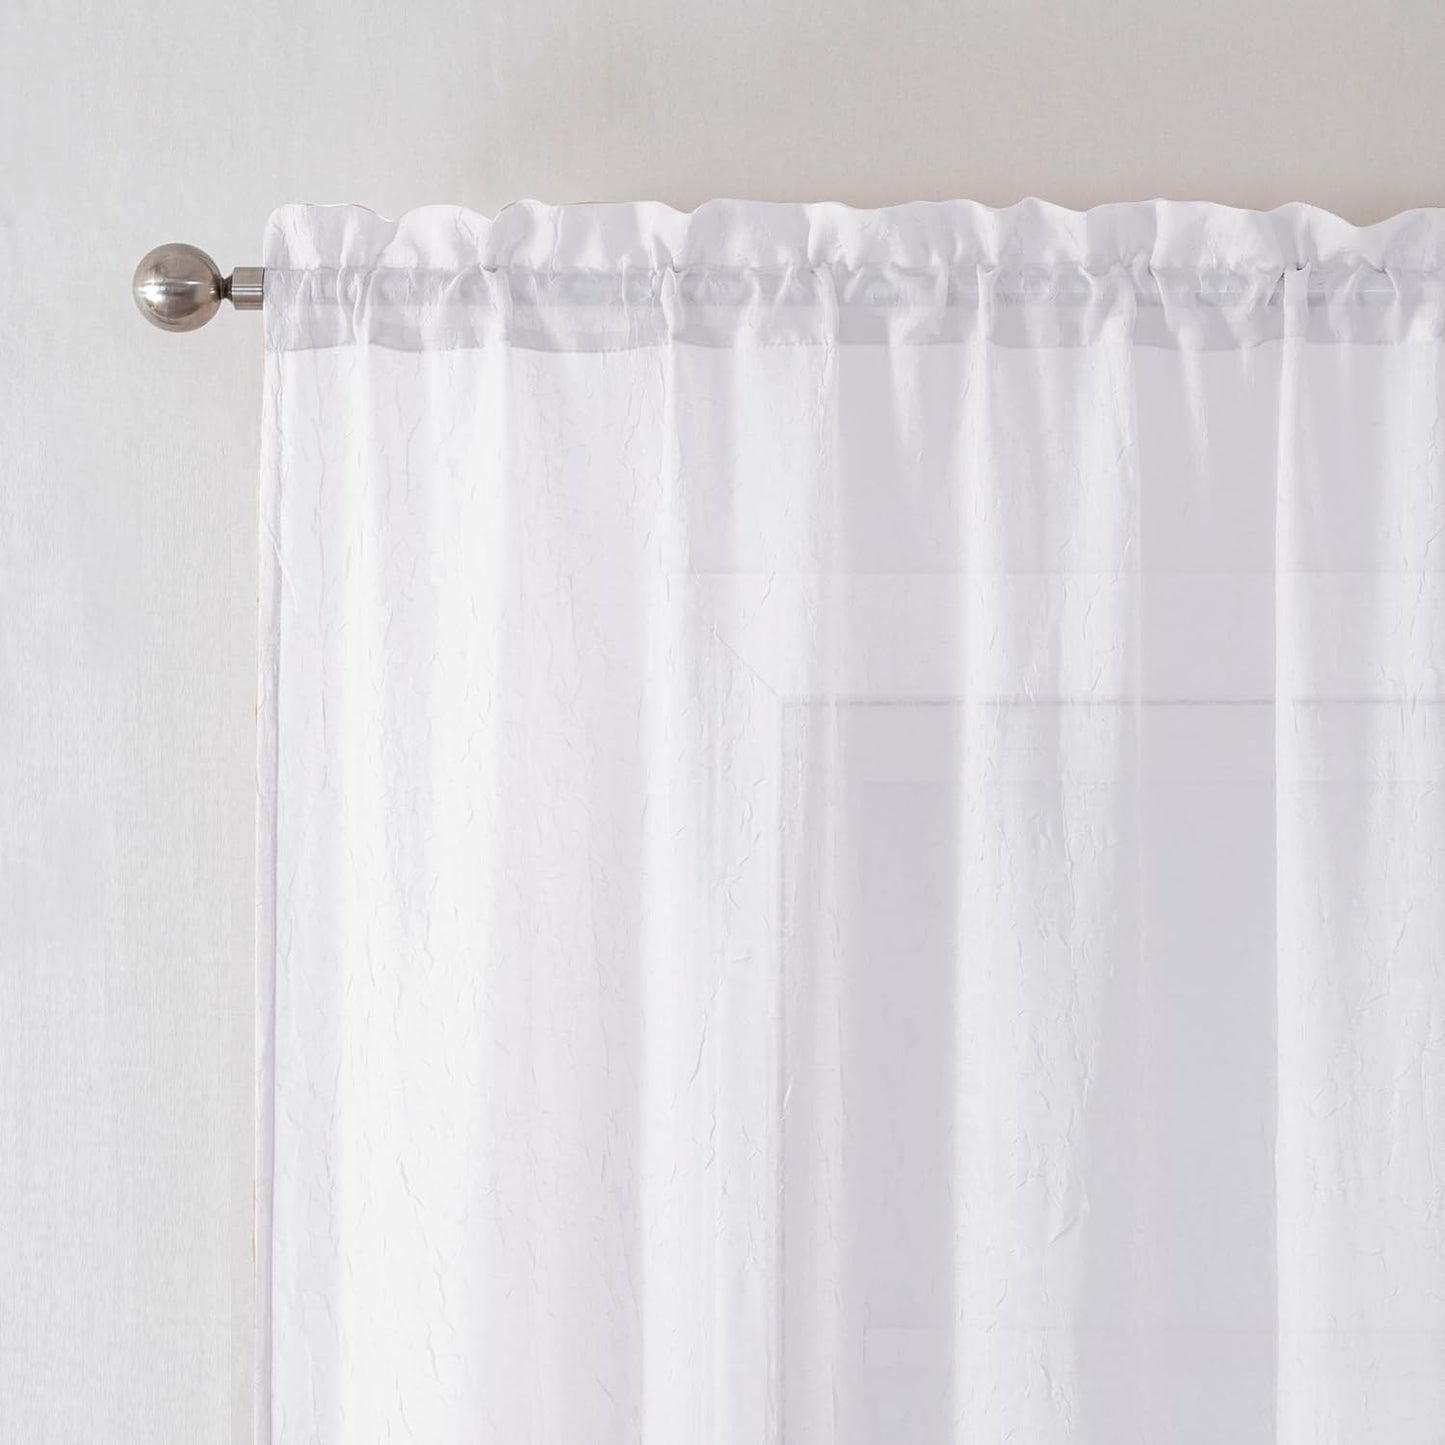 Chyhomenyc Crushed White Sheer Valances for Window 14 Inch Length 2 PCS, Crinkle Voile Short Kitchen Curtains with Dual Rod Pockets，Gauzy Bedroom Curtain Valance，Each 42Wx14L Inches  Chyhomenyc White 42 W X 84 L 